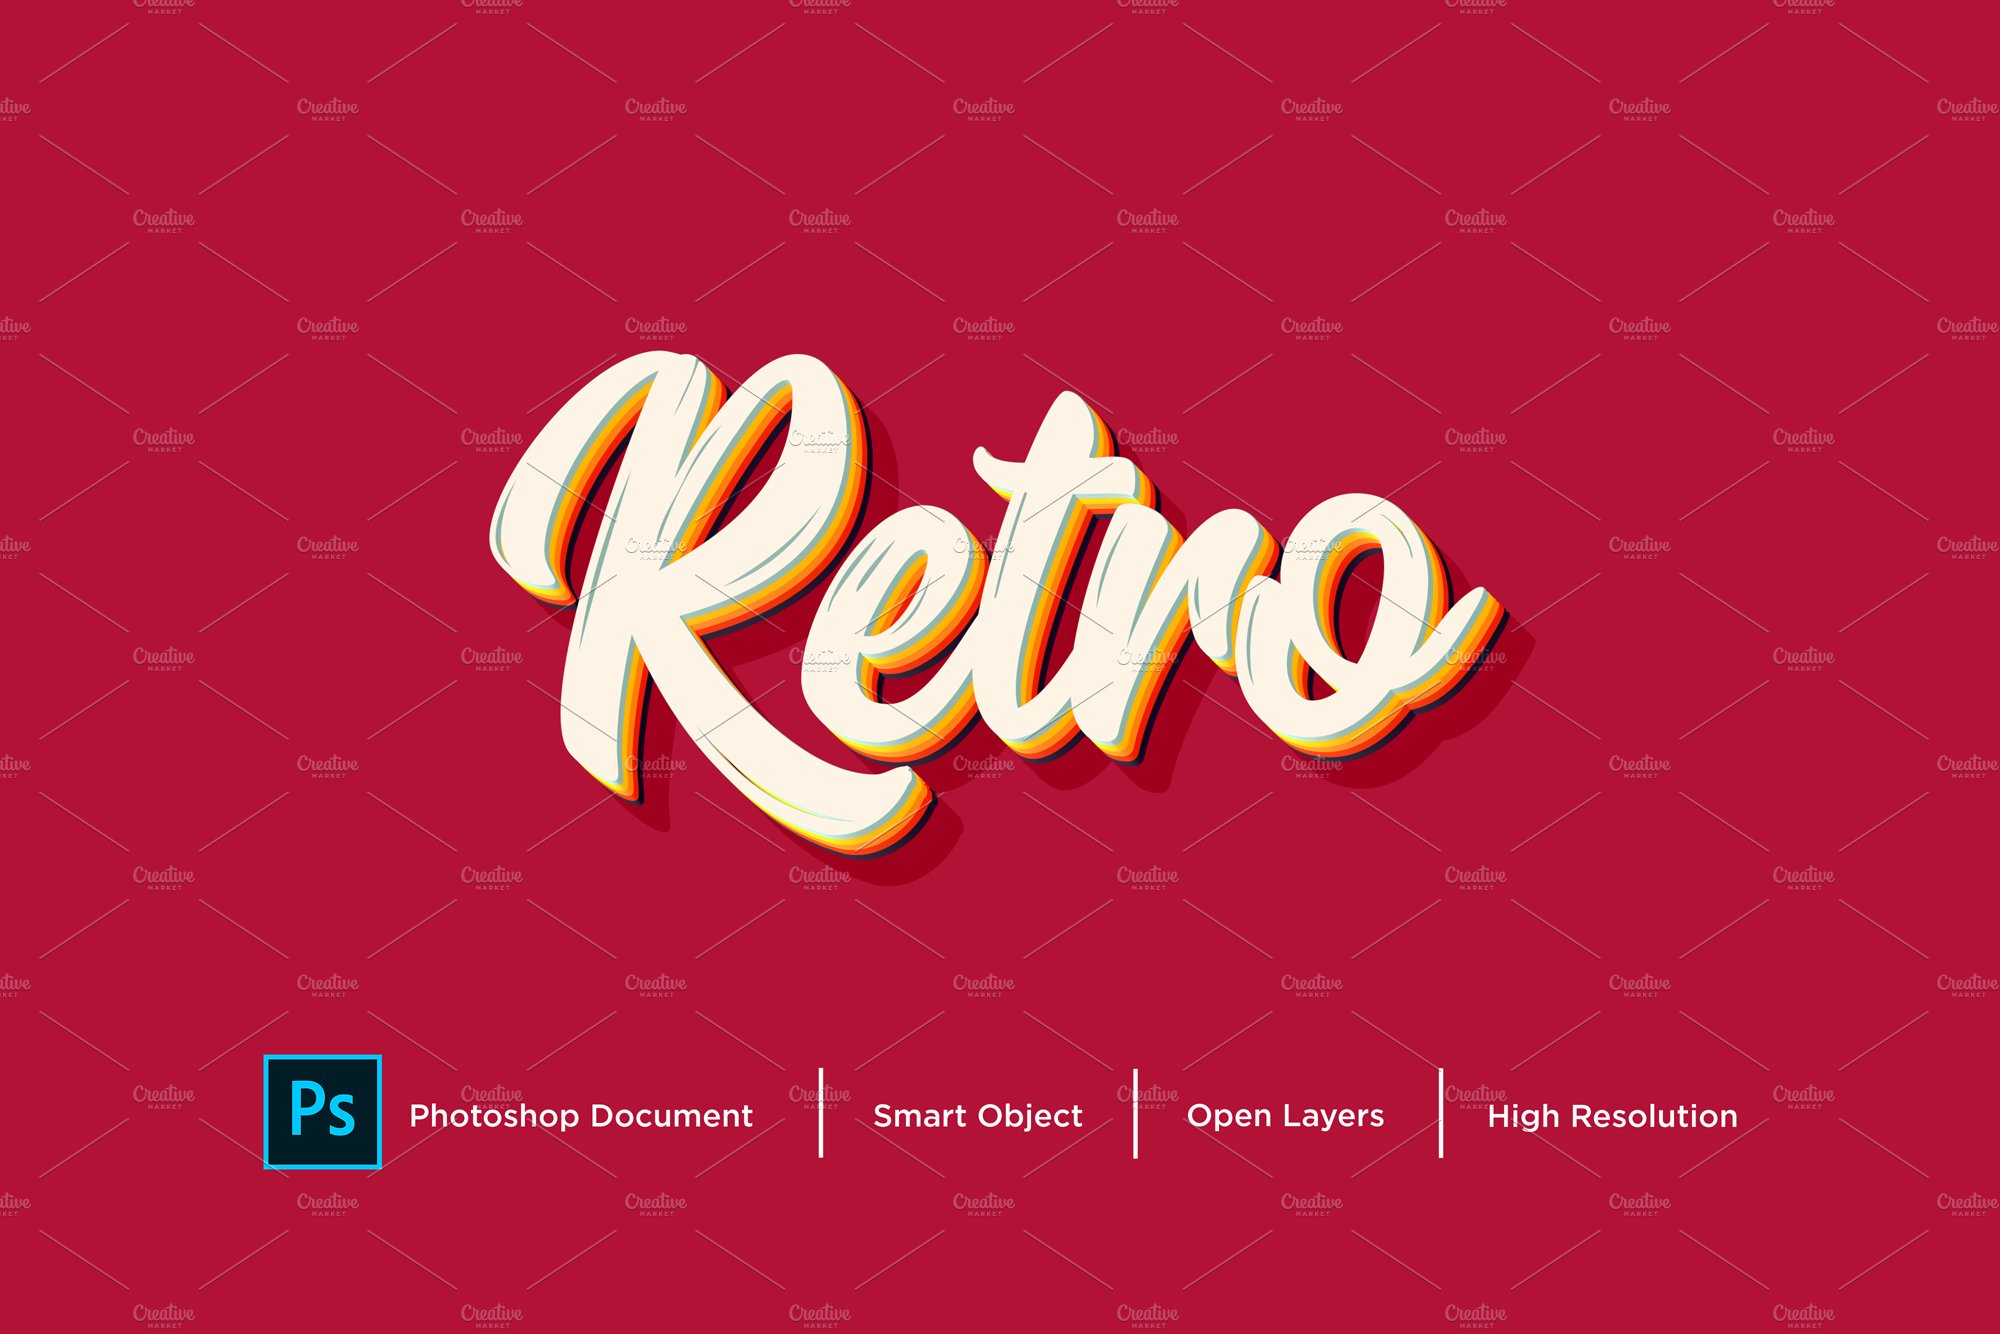 Retro Text Effect & Layer Stylecover image.